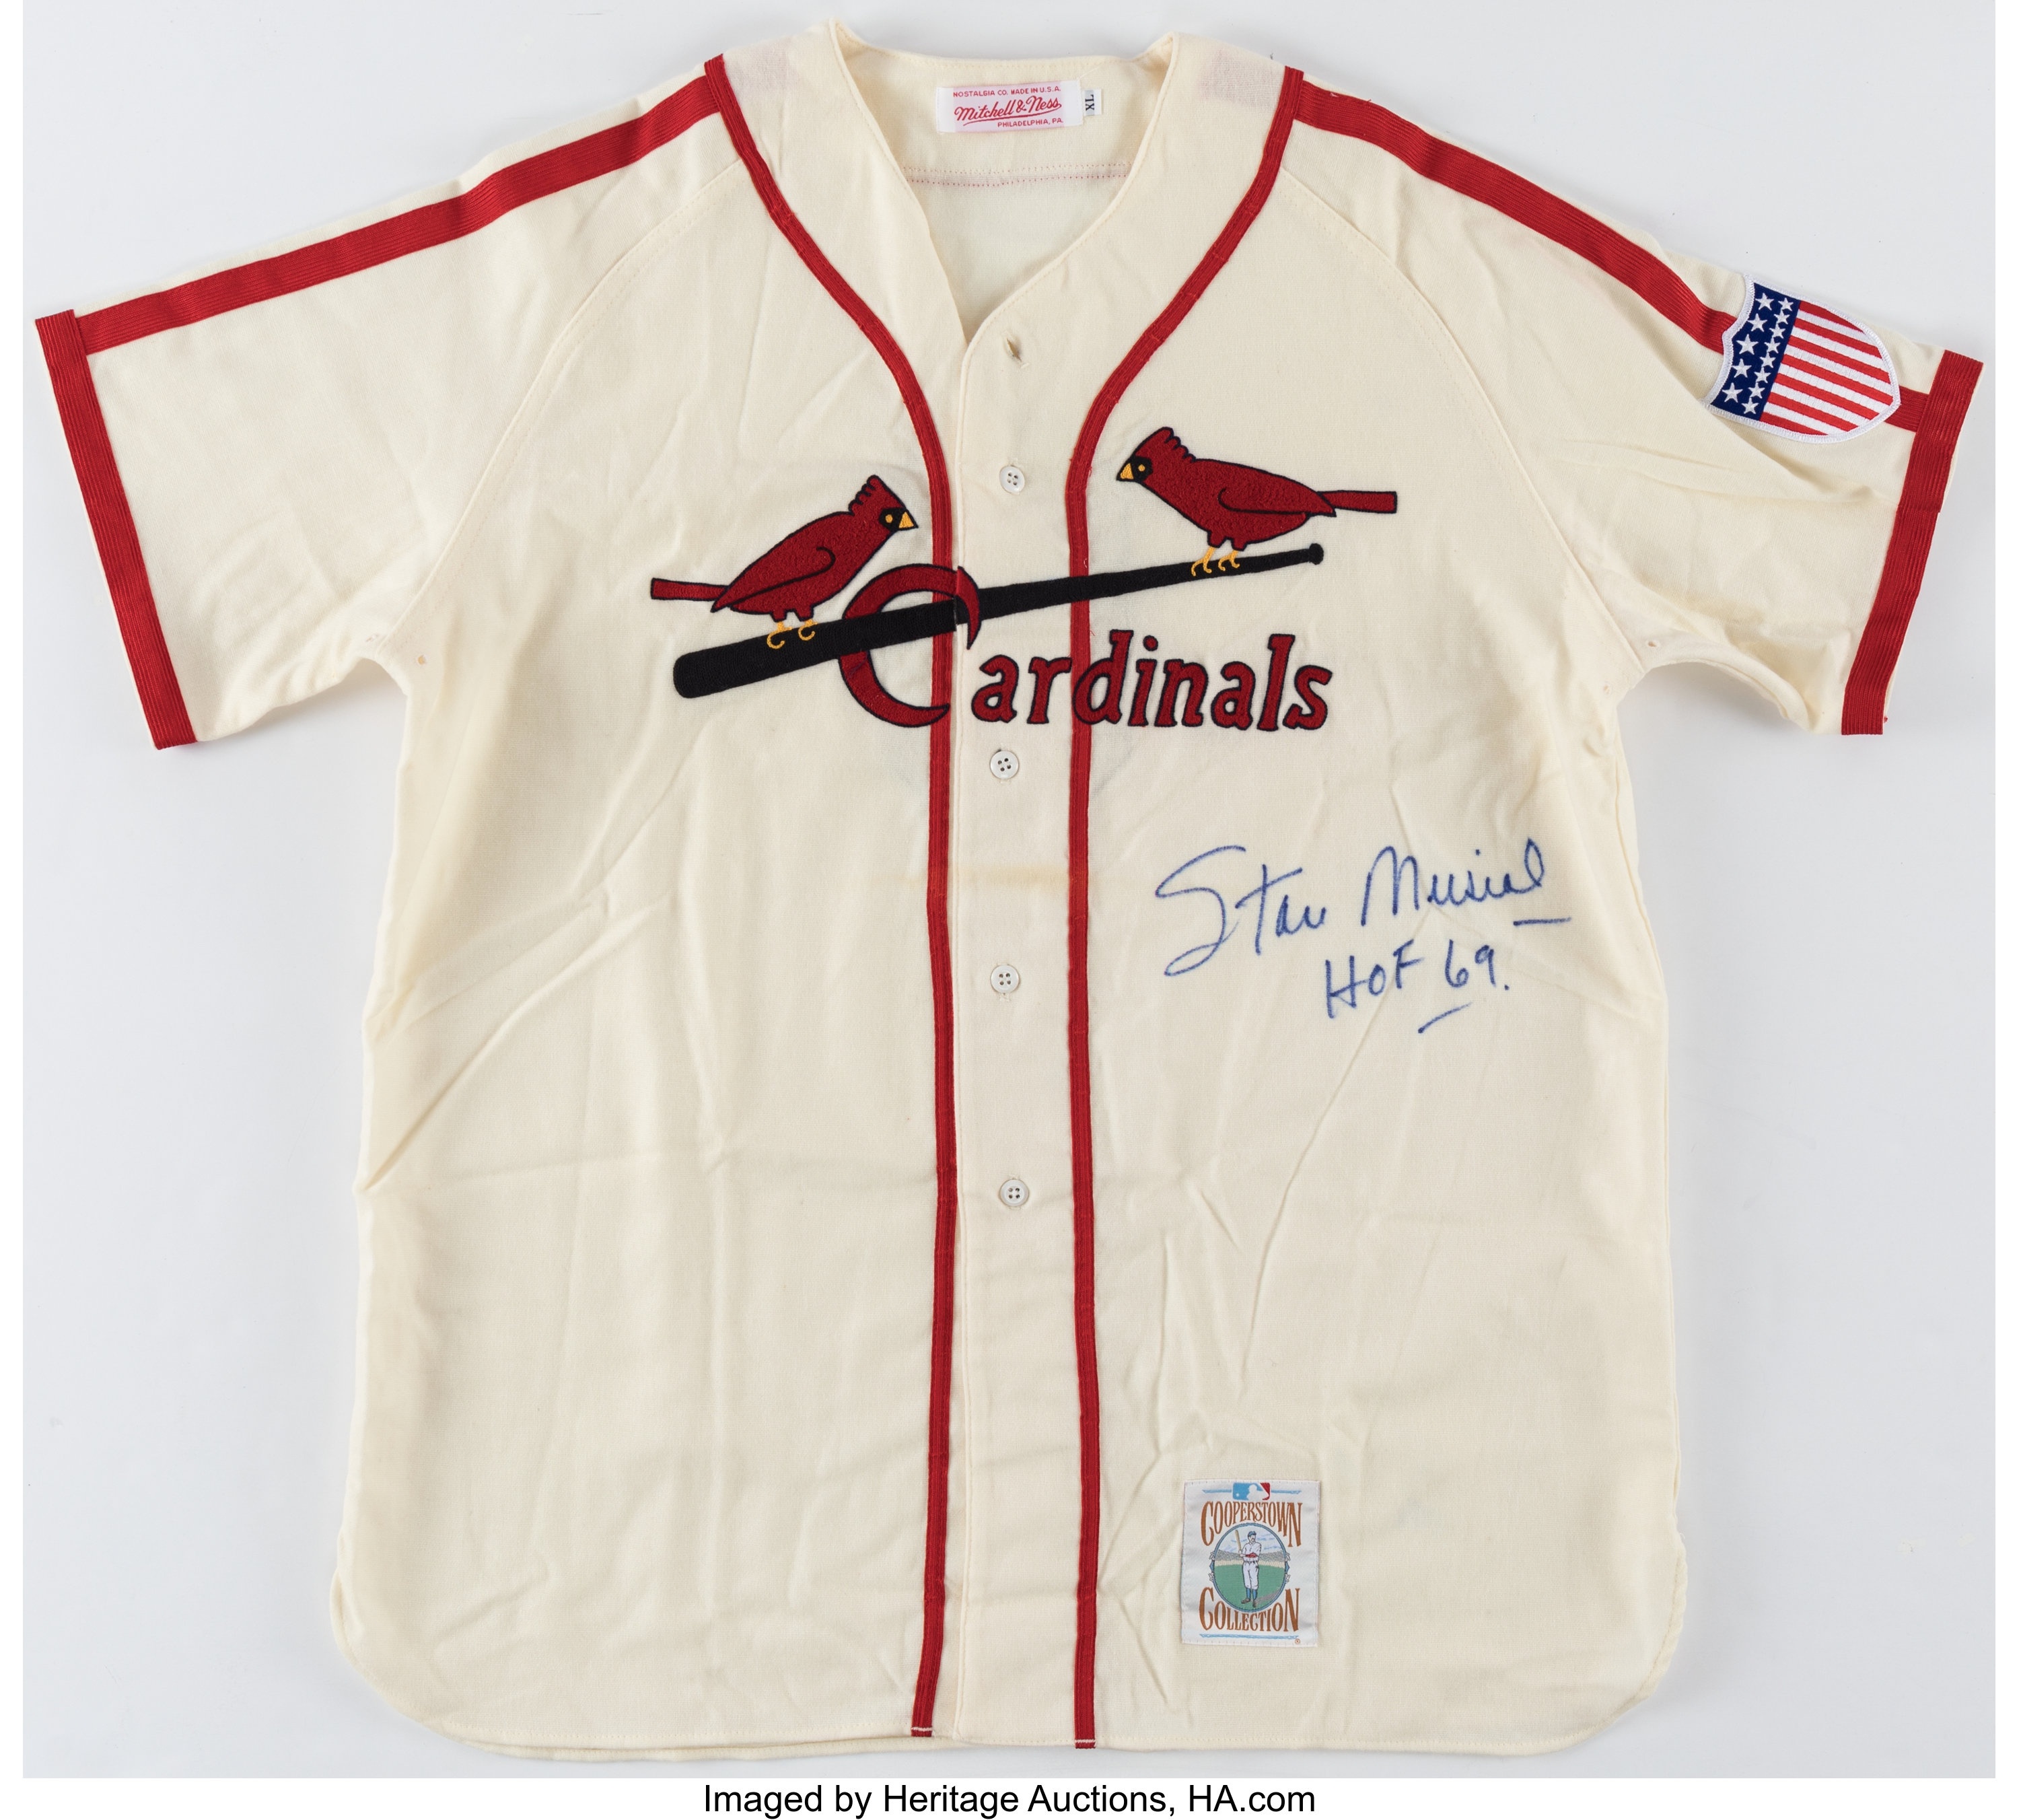 Stan Musial Signed St. Louis Cardinals Jersey. Autographs